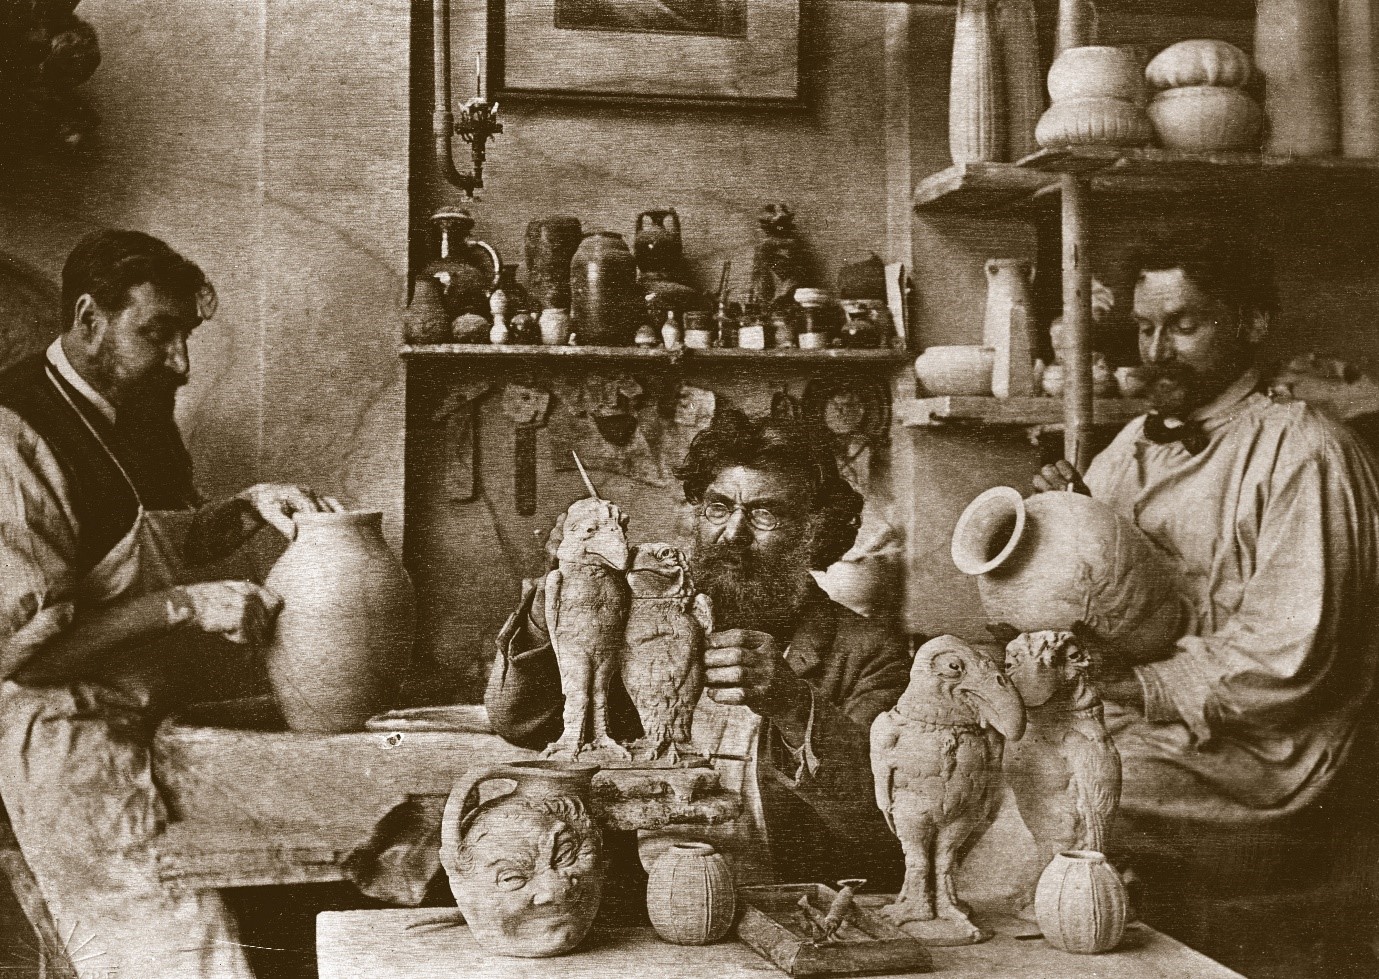 The Martin brothers in the studio at the Southall Pottery (b/w photo), English Photographer, (19th century) / Private Collection / Bridgeman Images